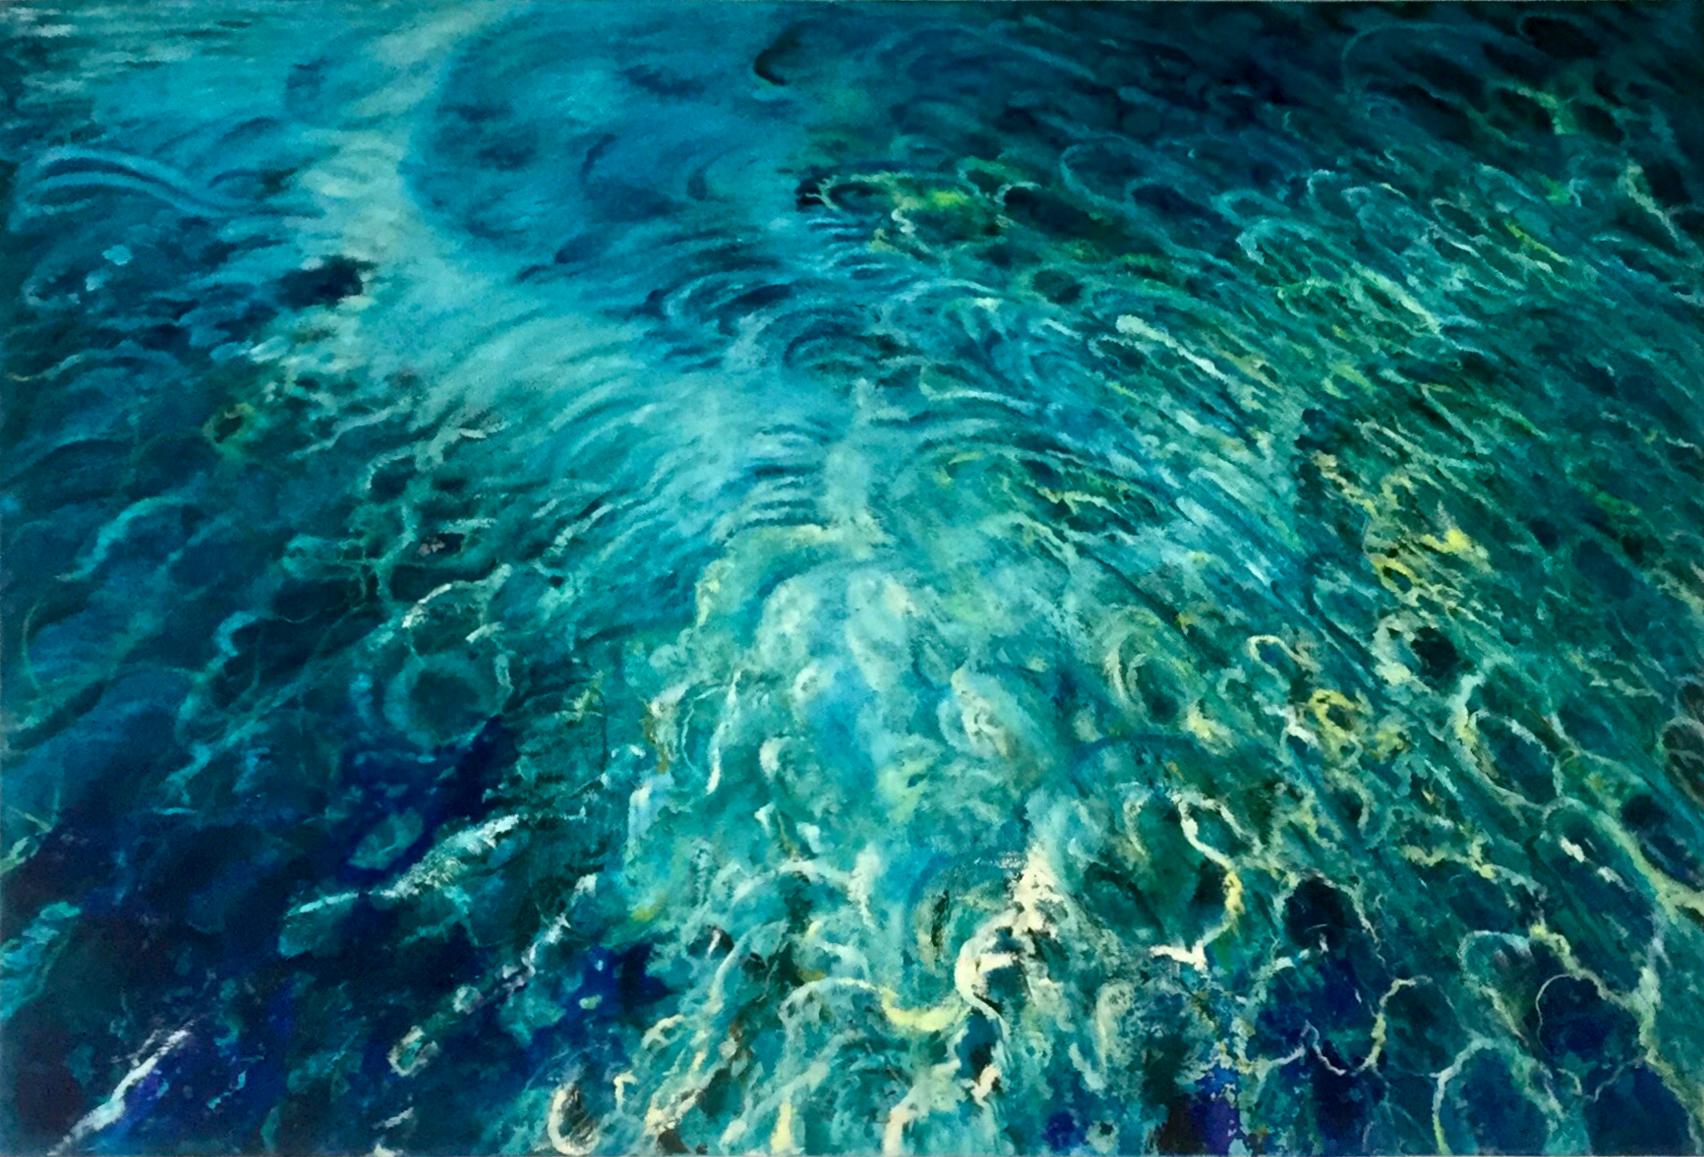 "Shimmery", Bright and colorful turquoise blues waterscape, sensual reflections